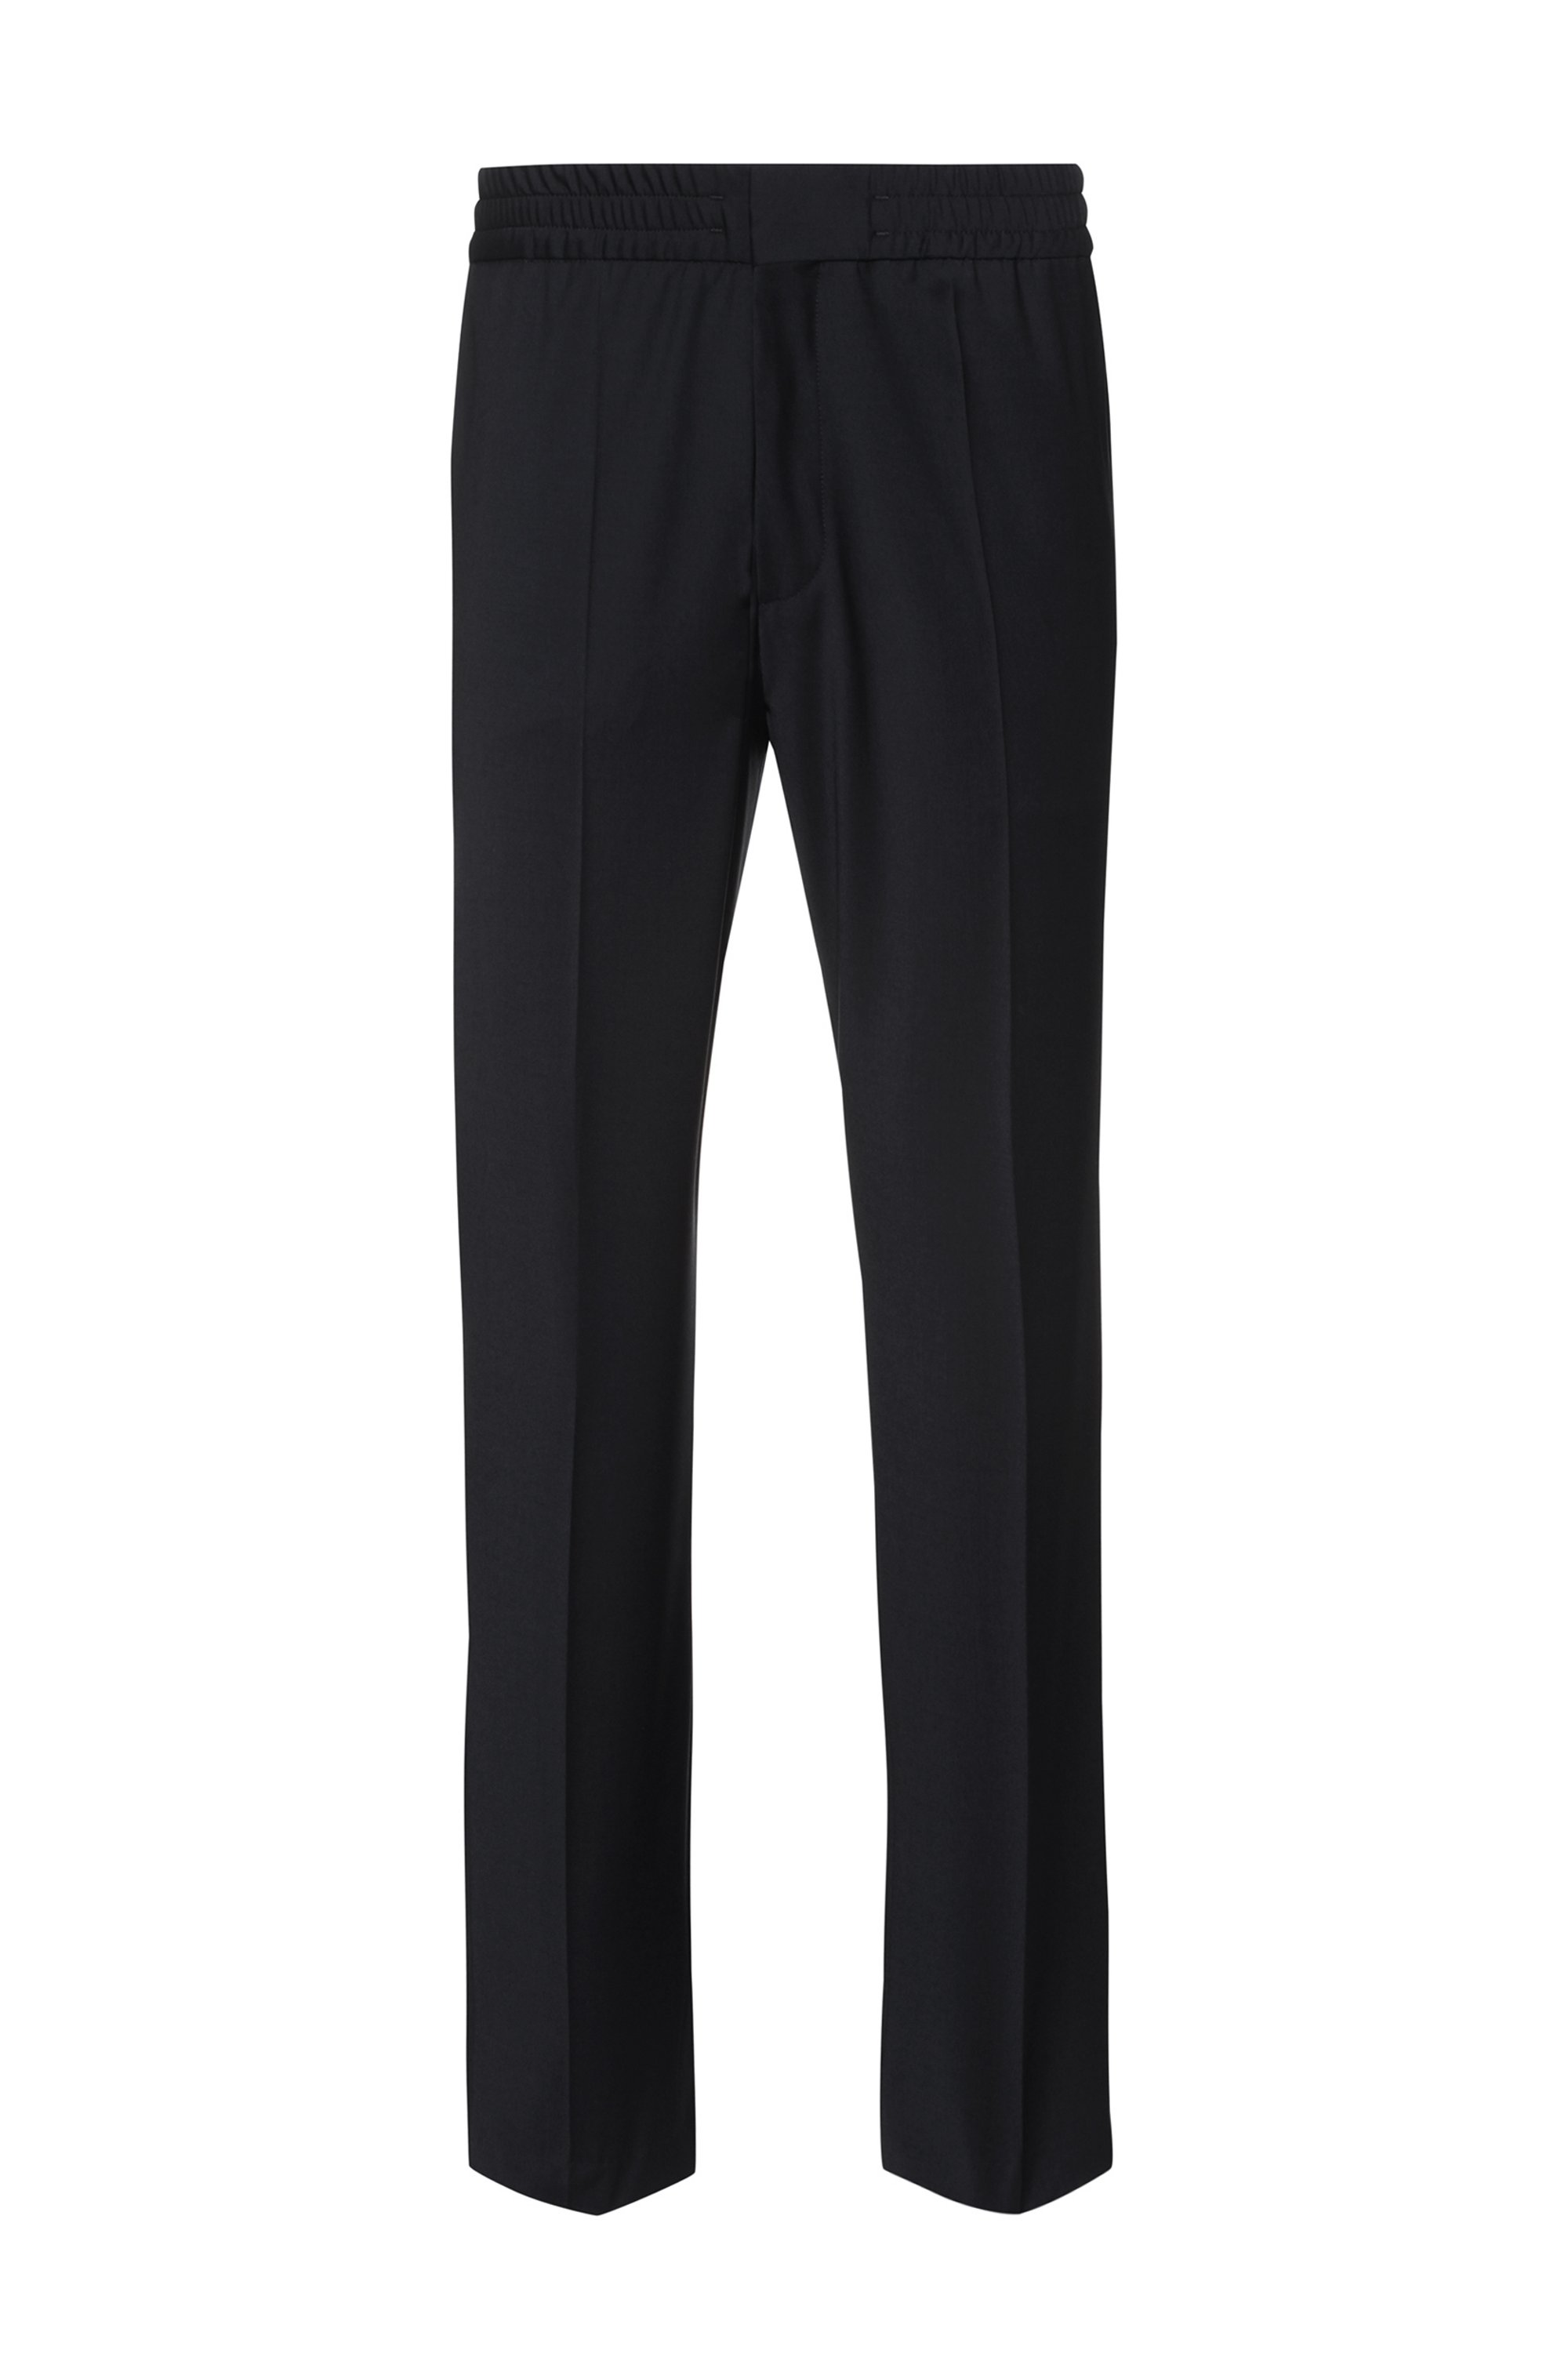 Extra-slim-fit trousers in a wool blend, Schwarz